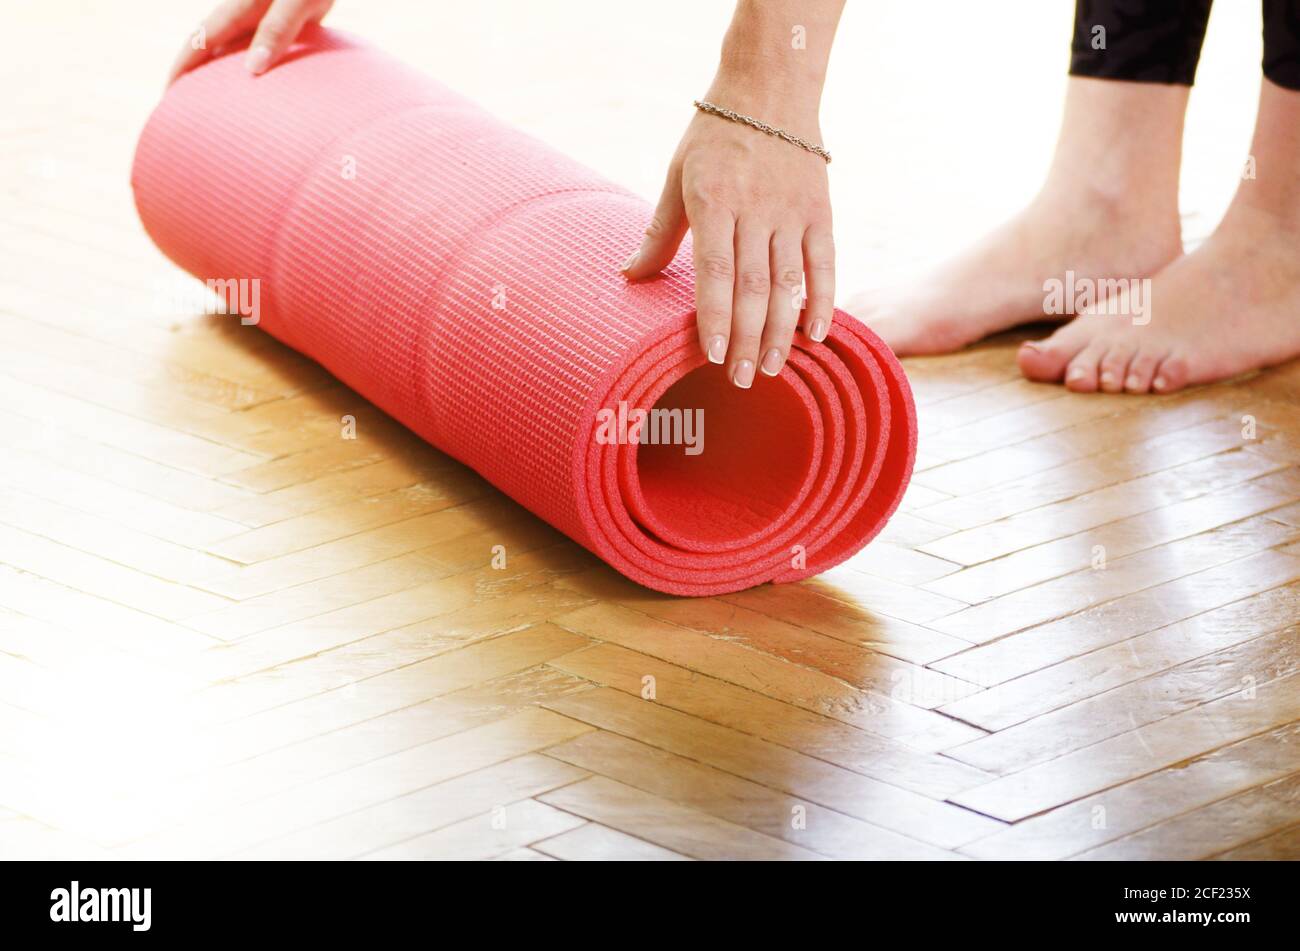 Female hands unrolling yoga mat before workout exercise. Healthy lifestyle concept. Stock Photo